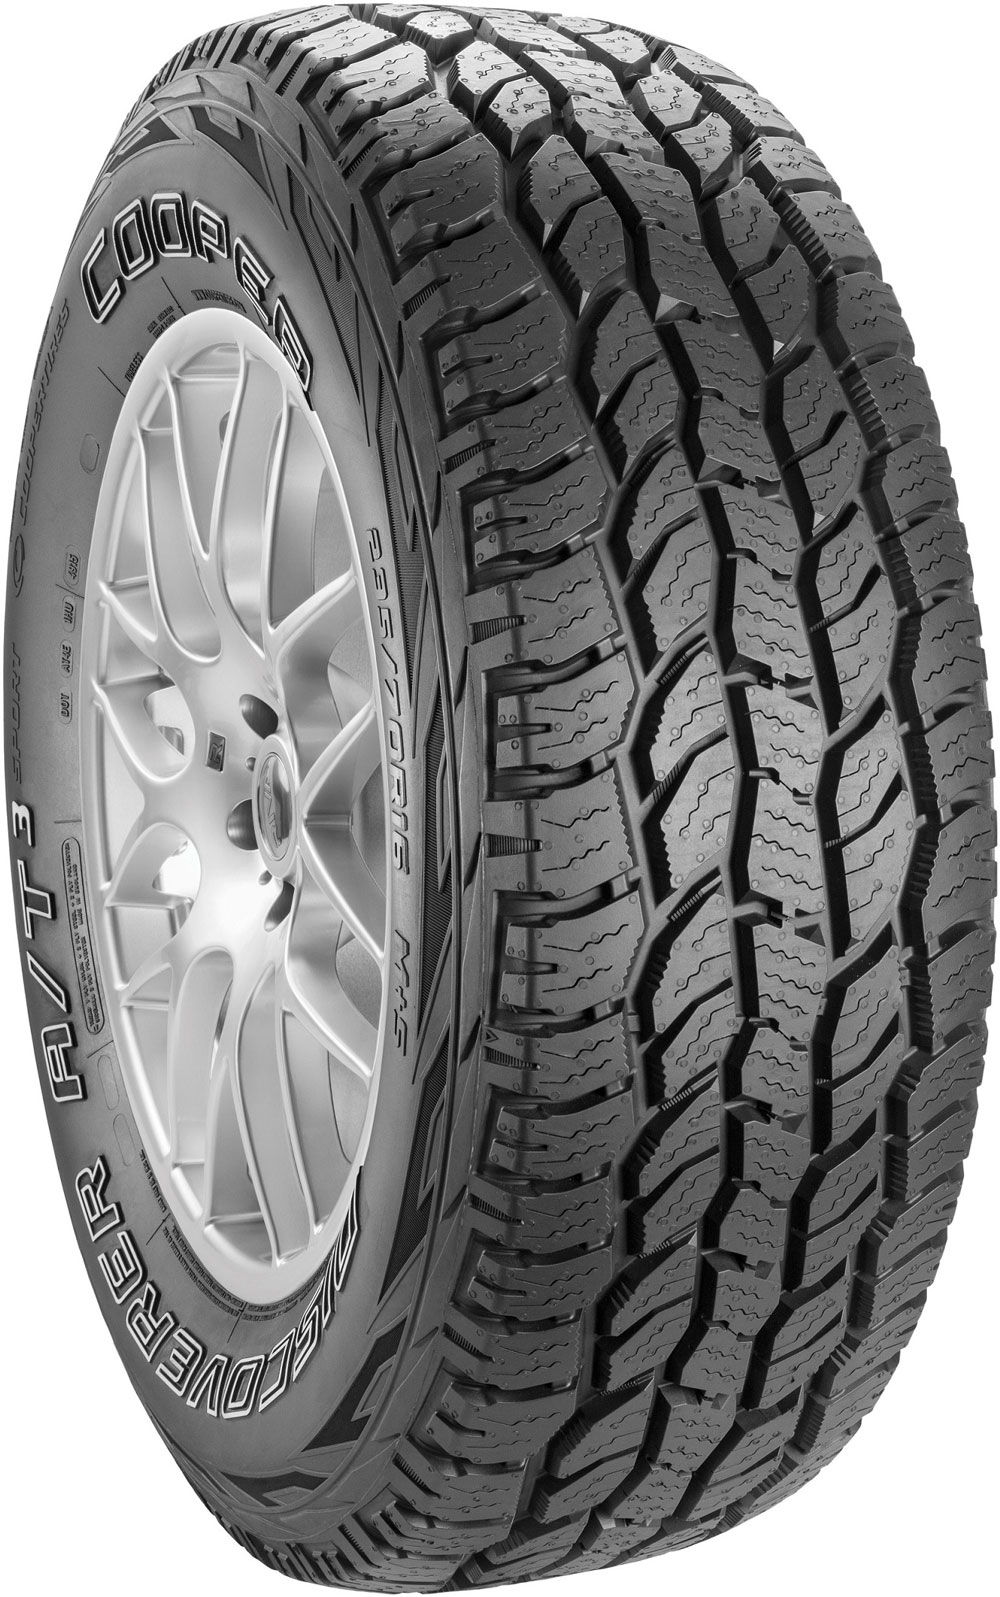 COOPER DISCOVERER A/T3 SPORT BSW XL 285/50 R20 116S